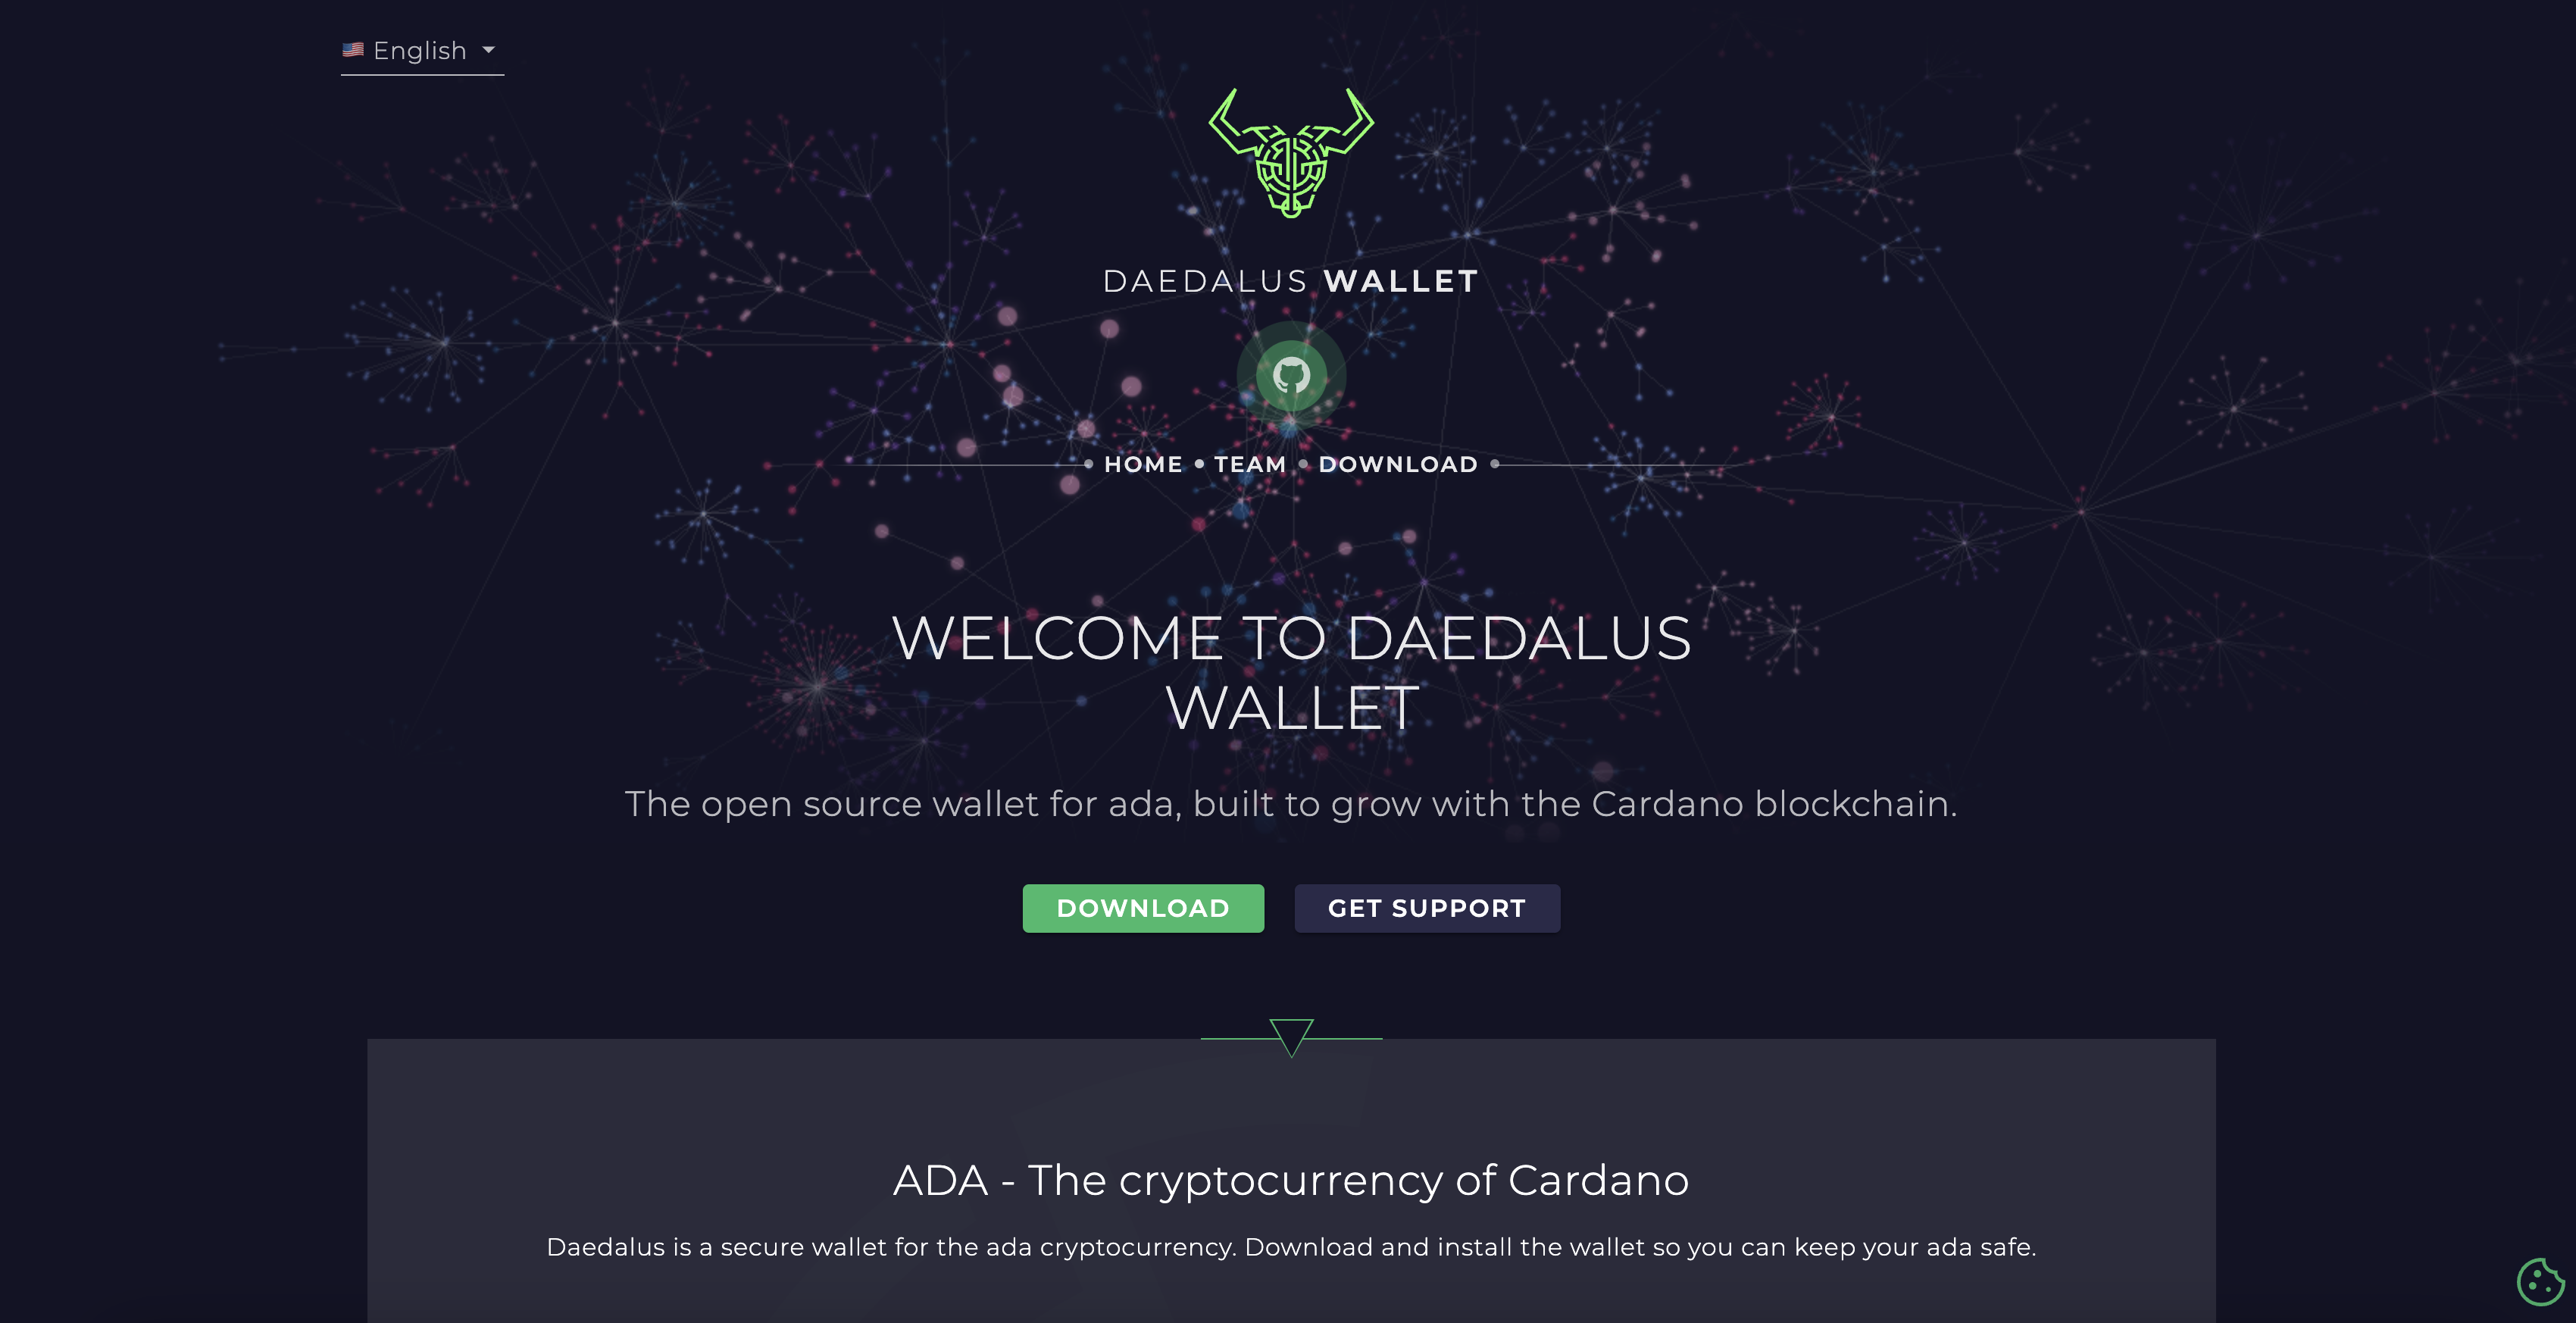 Homepage screenshot of the Cardano (ADA) cryptocurrency wallet Daedalus